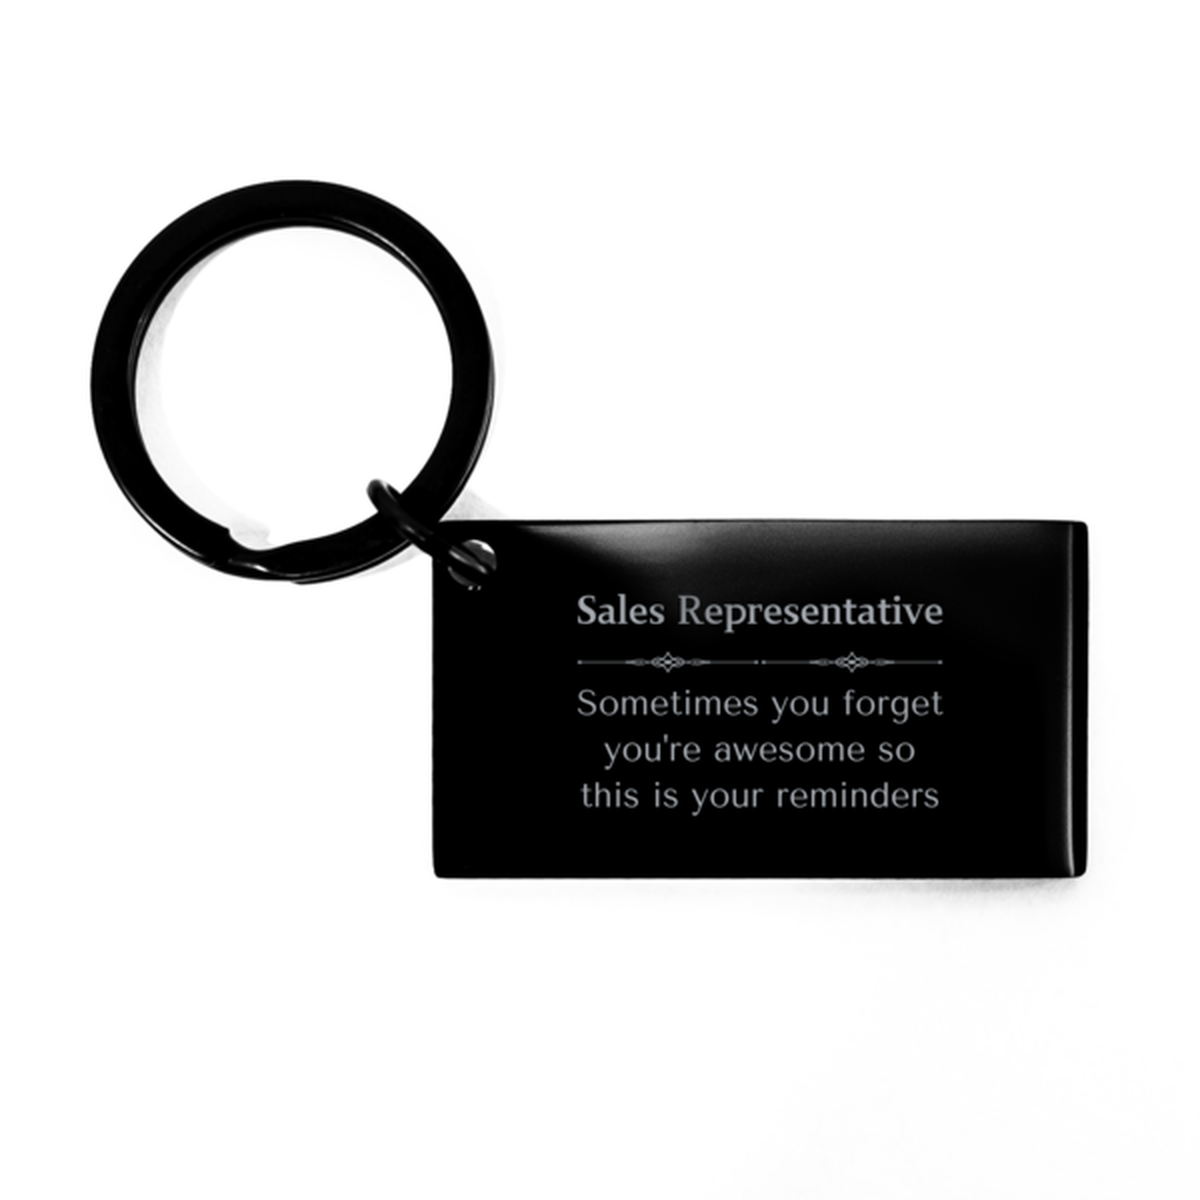 Sentimental Sales Representative Keychain, Trainer Sometimes you forget you're awesome so this is your reminders, Graduation Christmas Birthday Gifts for Sales Representative, Men, Women, Coworkers